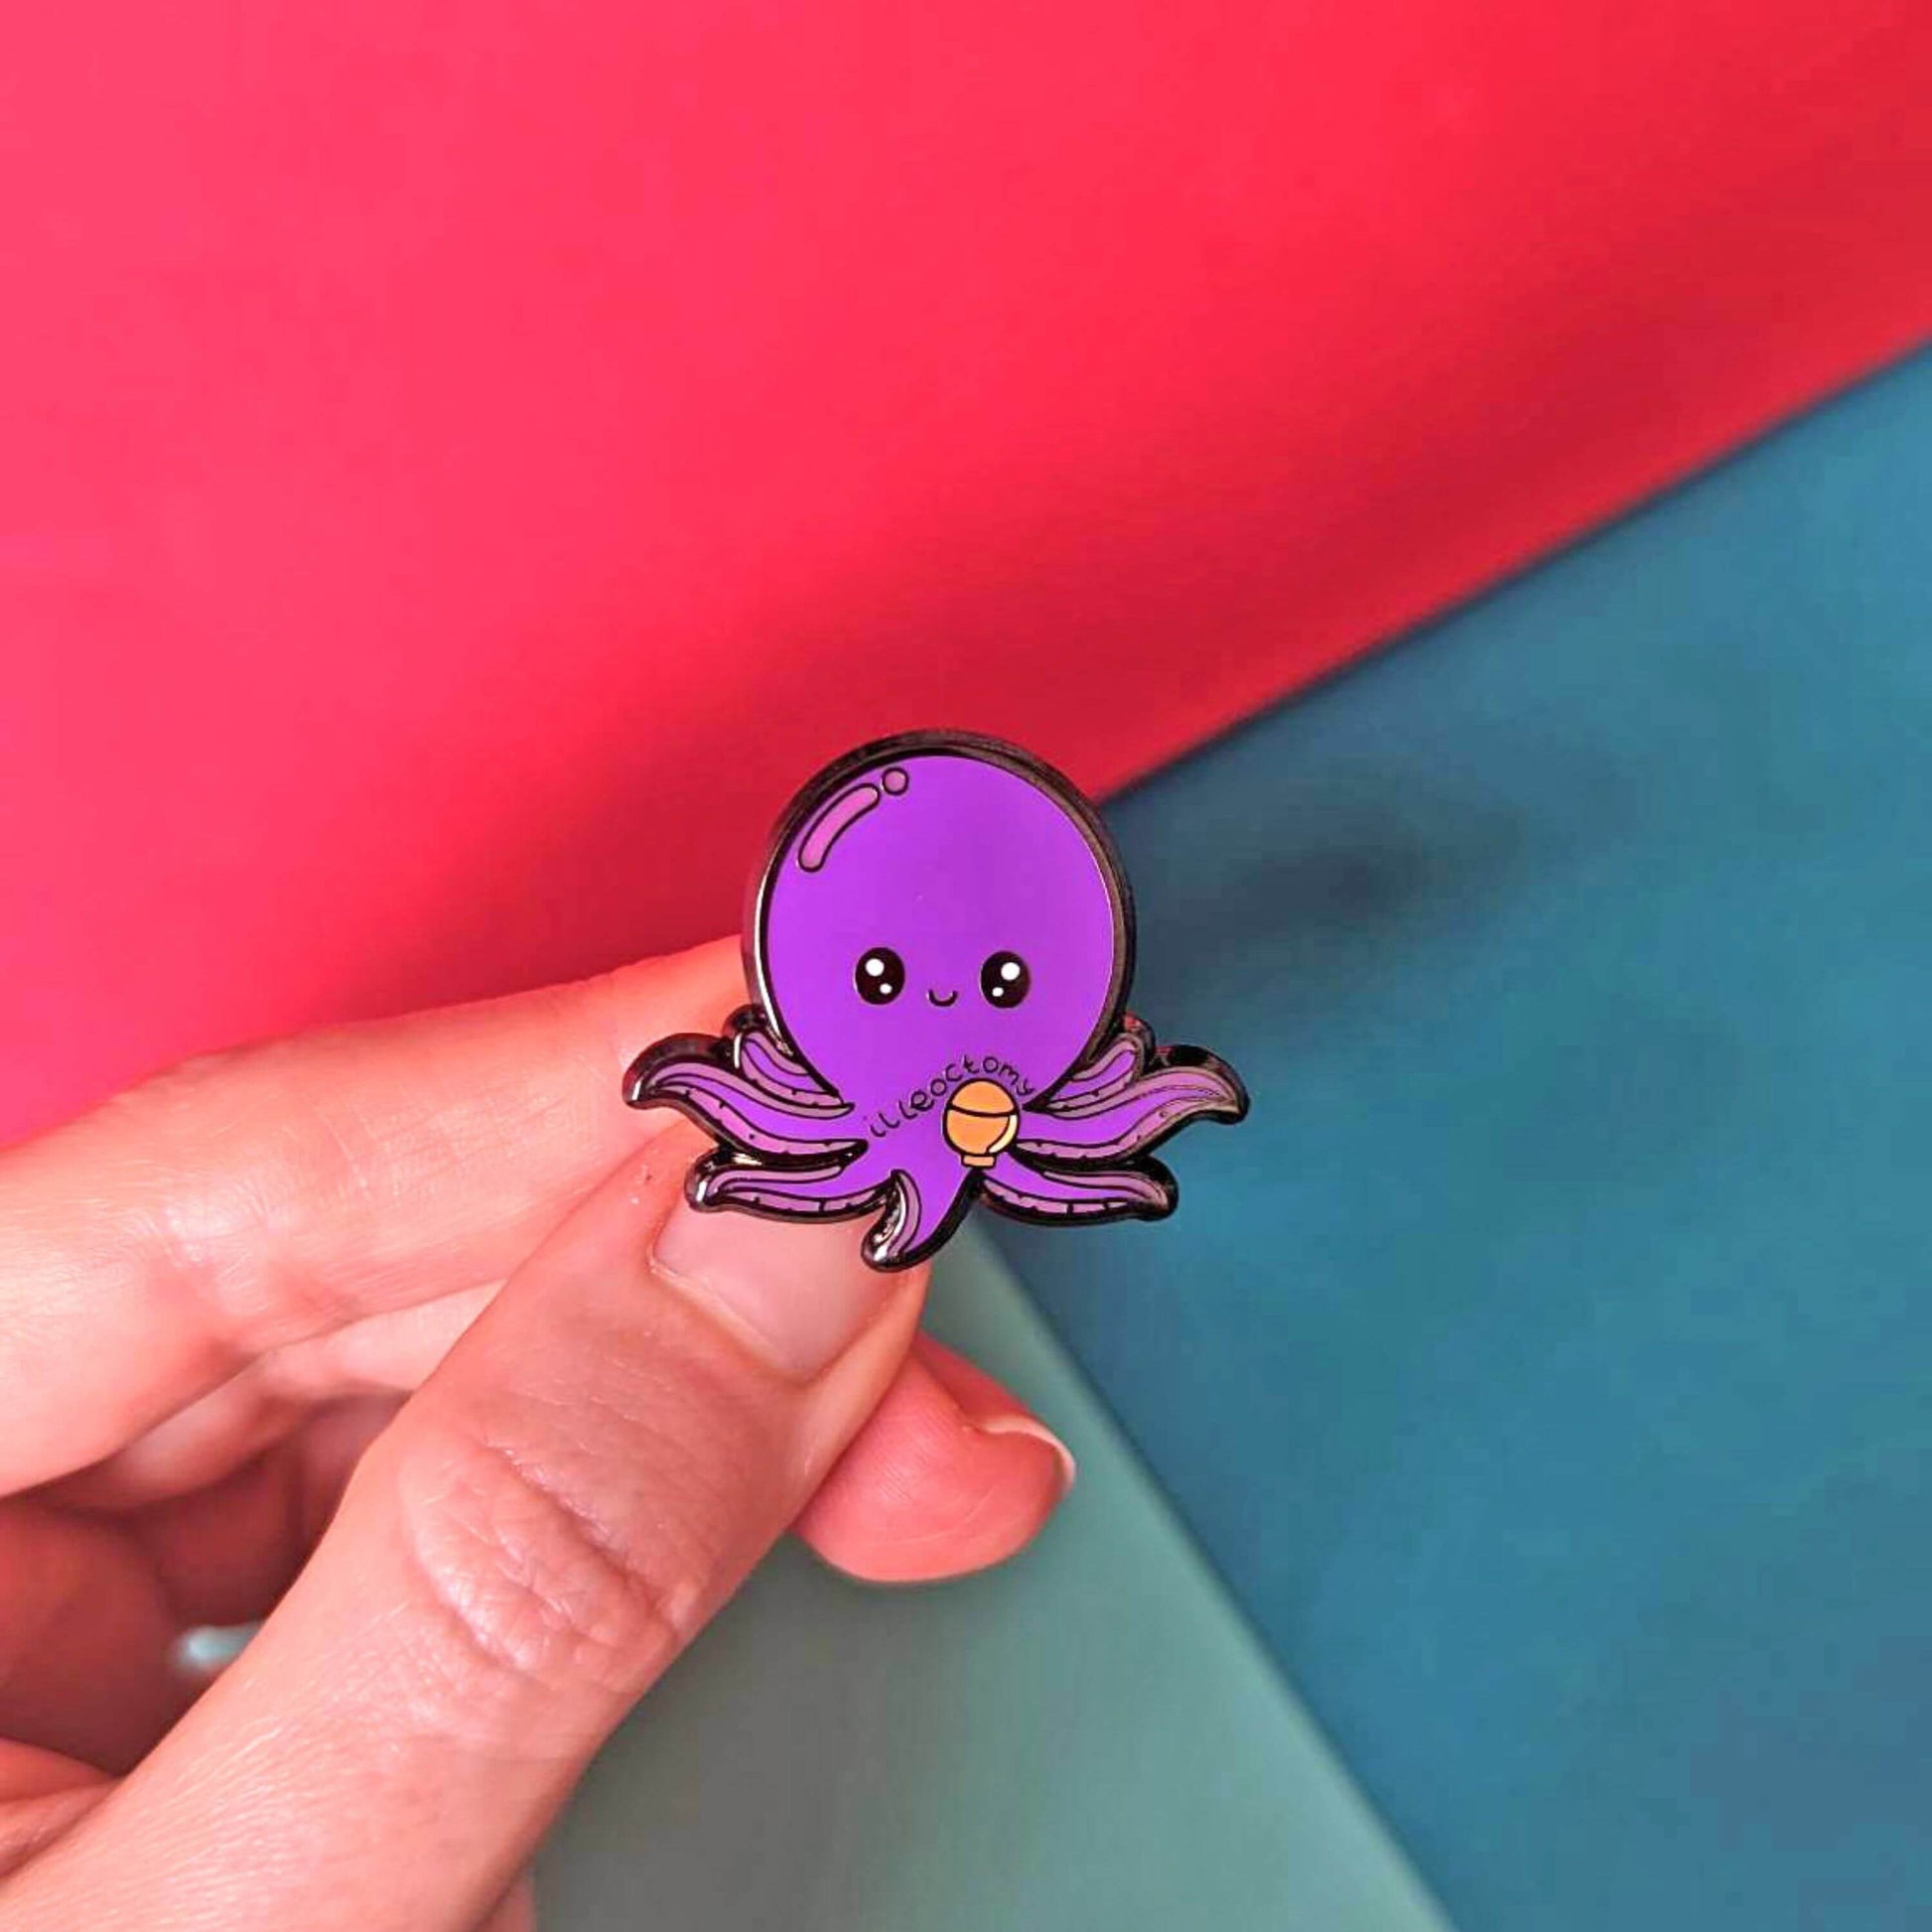 Ileoctomy Enamel Pin - Ileostomy held in front of a blue and red background. The enamel pin is a cute smiling purple octopus sticker with text saying ileoctomy on its belly with a stoma bag underneath. Enamel pin designed to raise awareness for Ileostomy